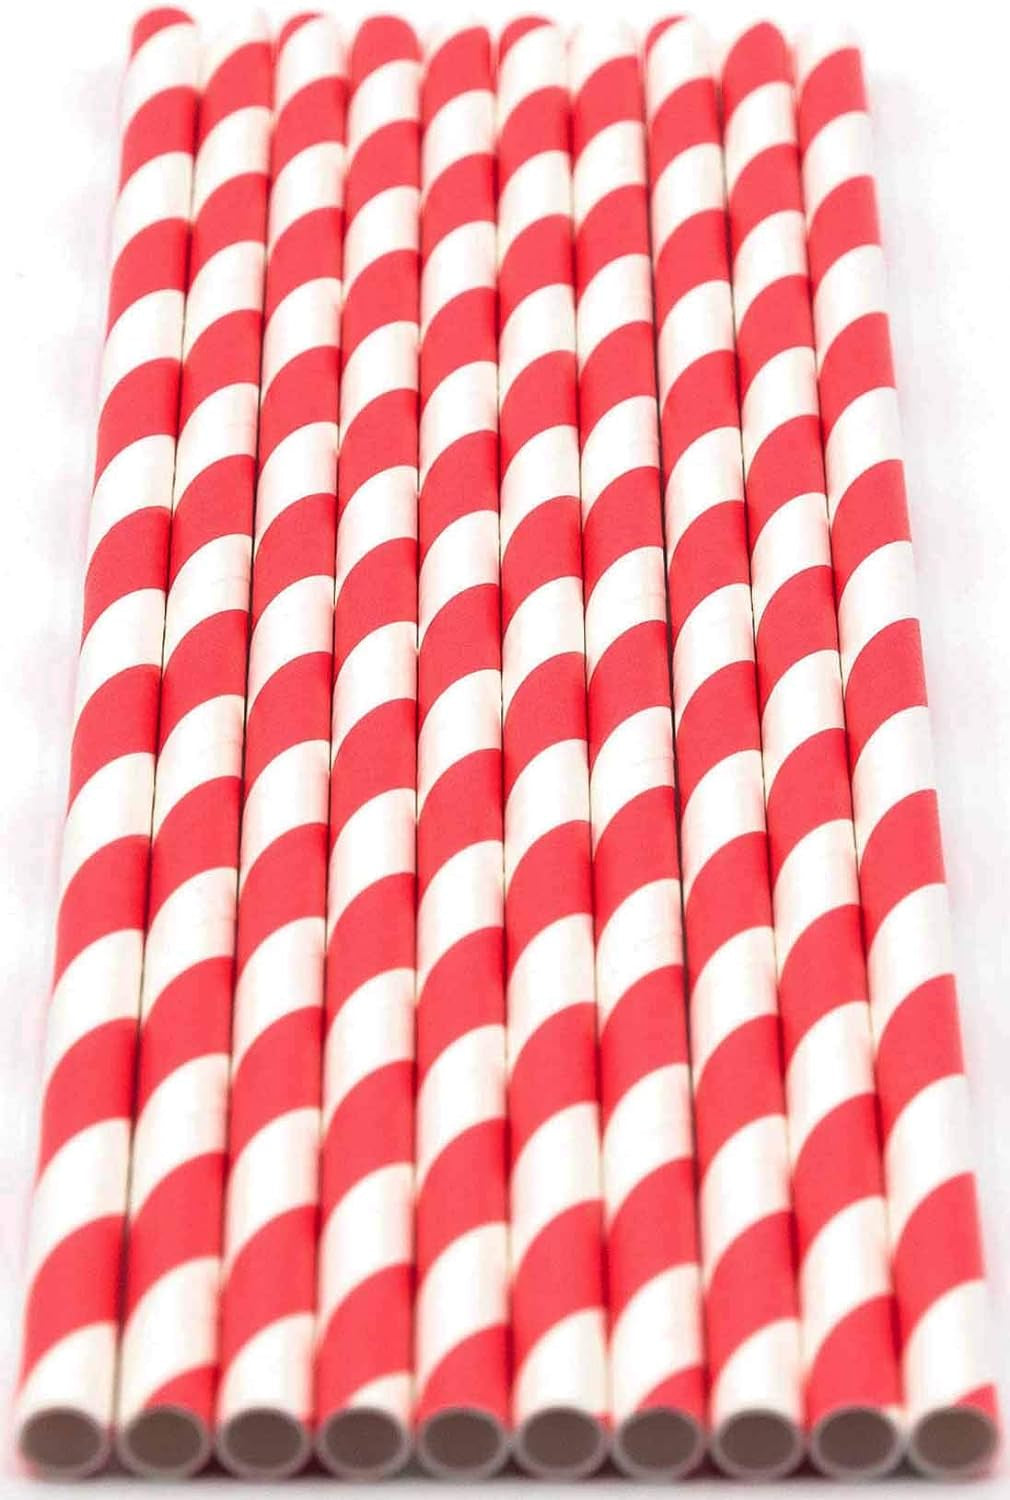 (Pack of 150) Red Swirls Biodegradable 4-Ply Paper Drinking Straws (Compostable, Non-Toxic, BPA-Free)